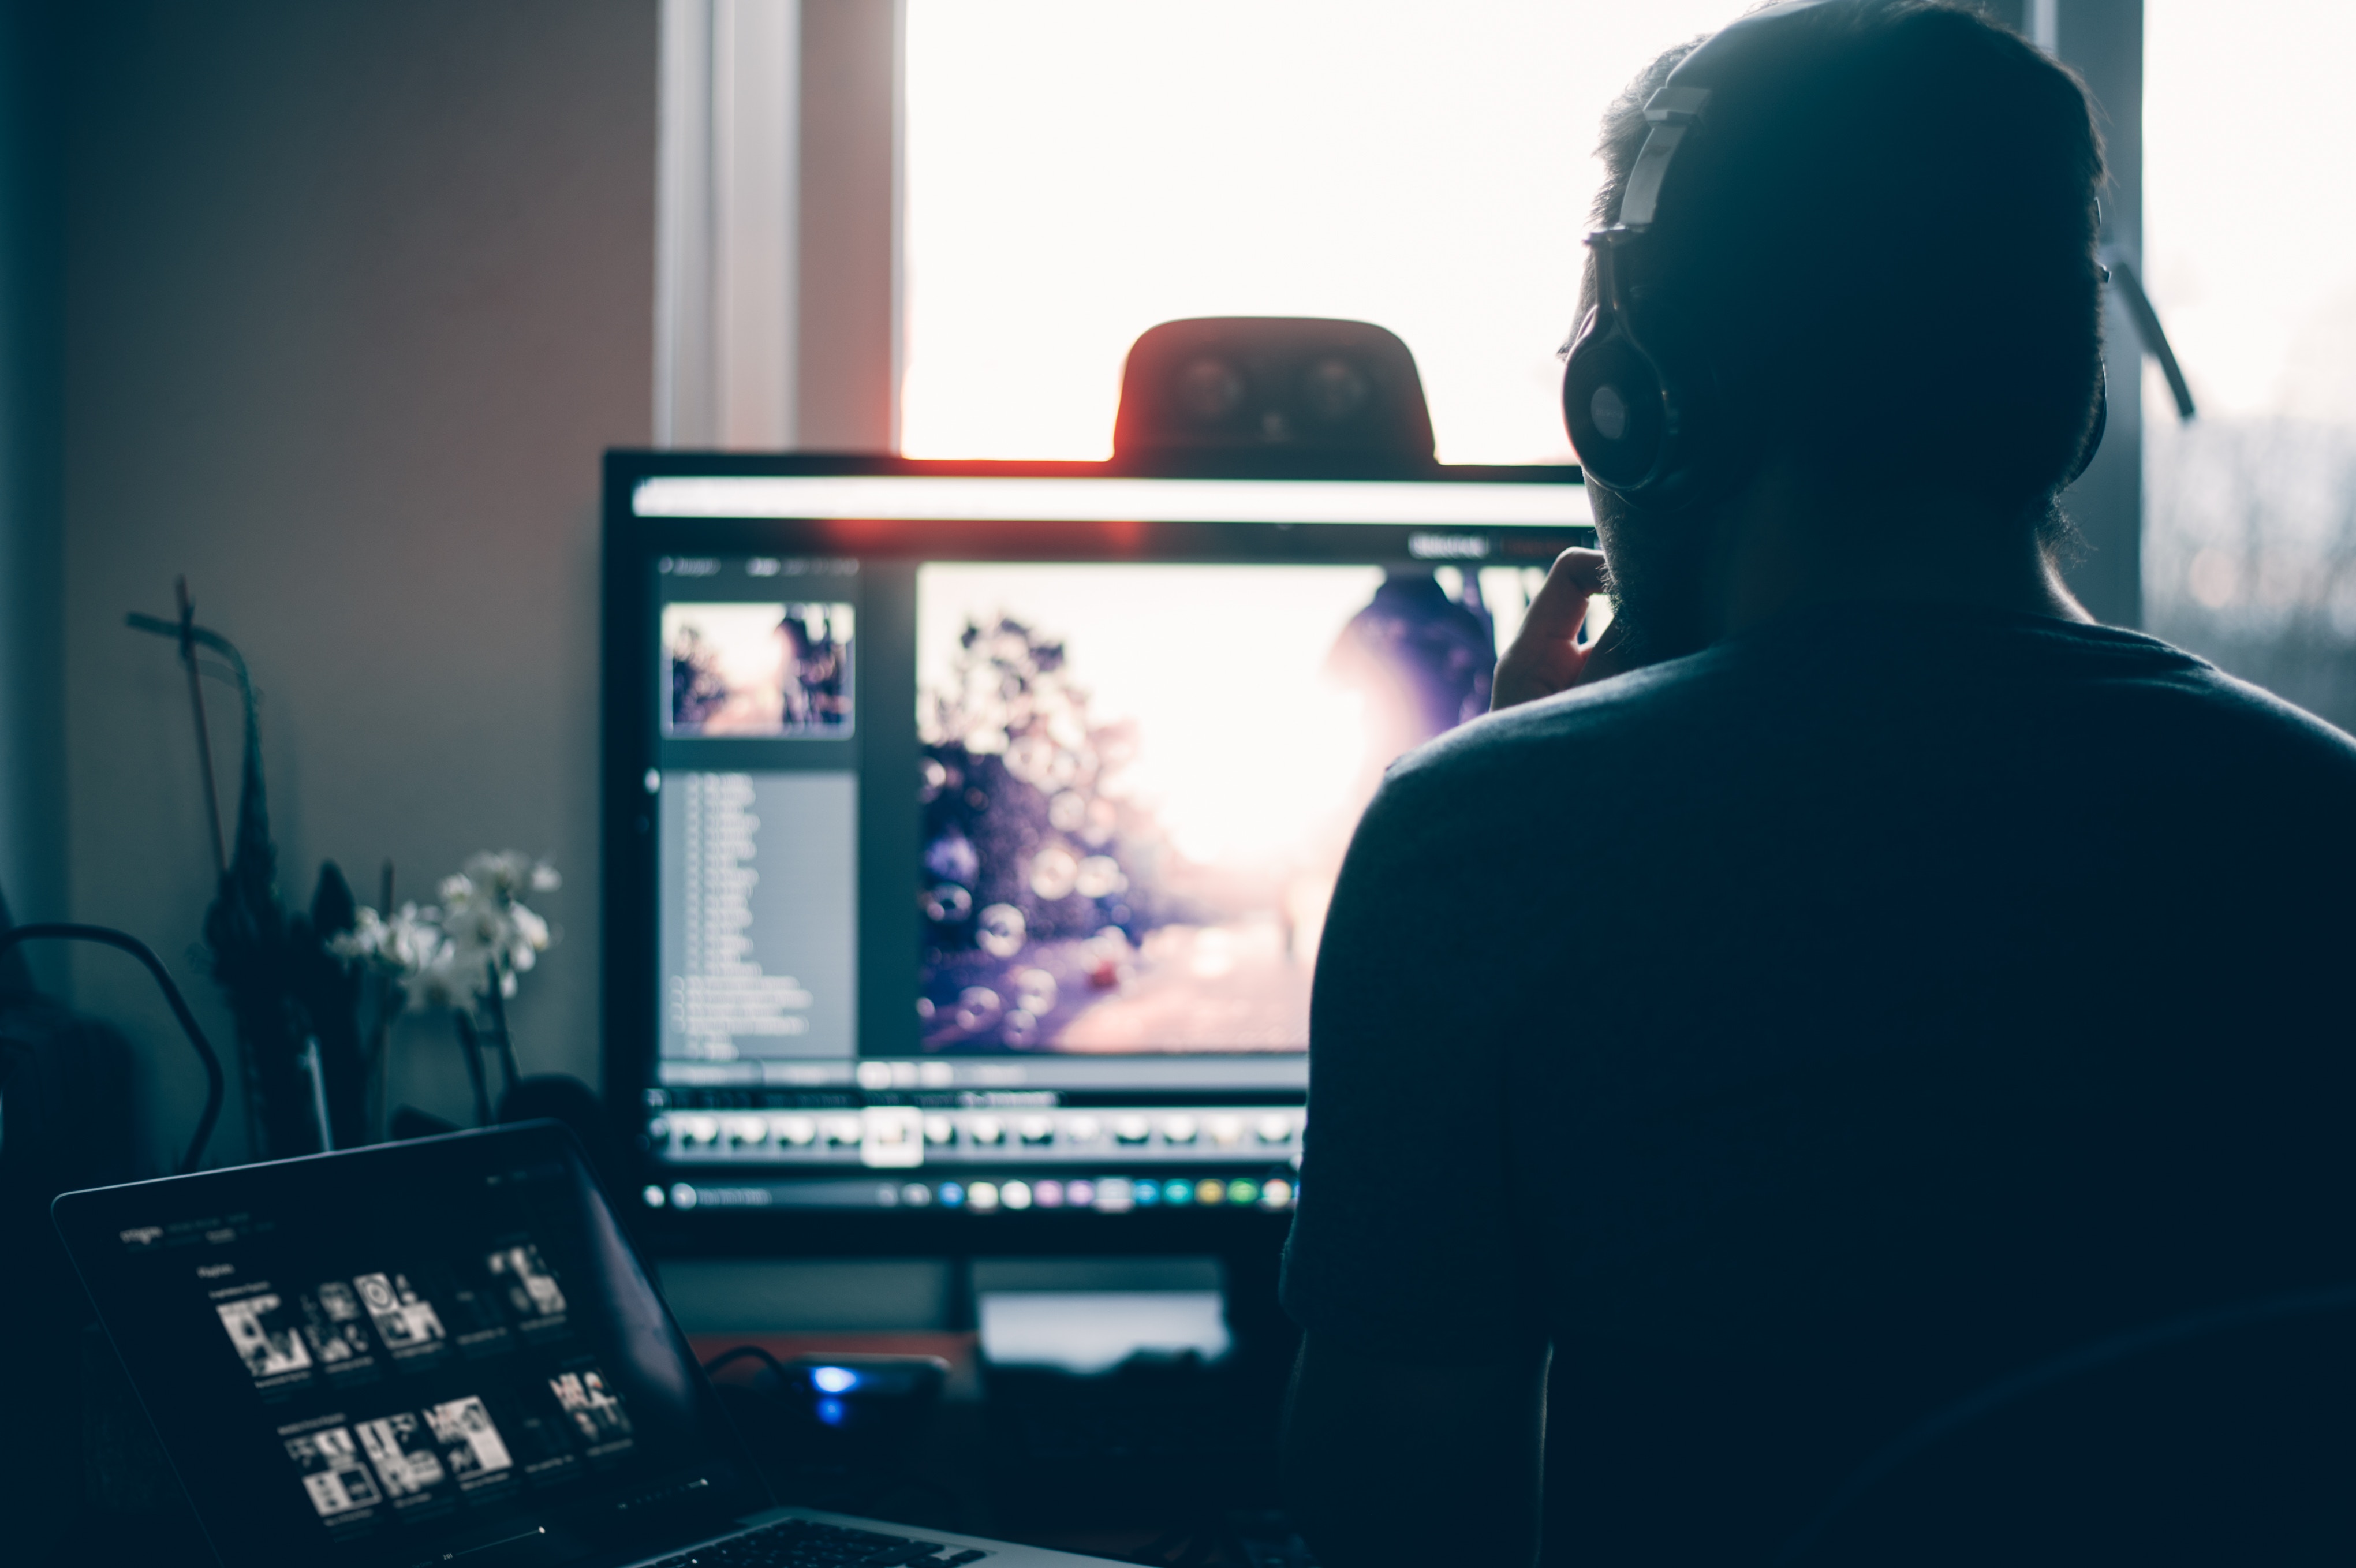 Spend less time editing your video